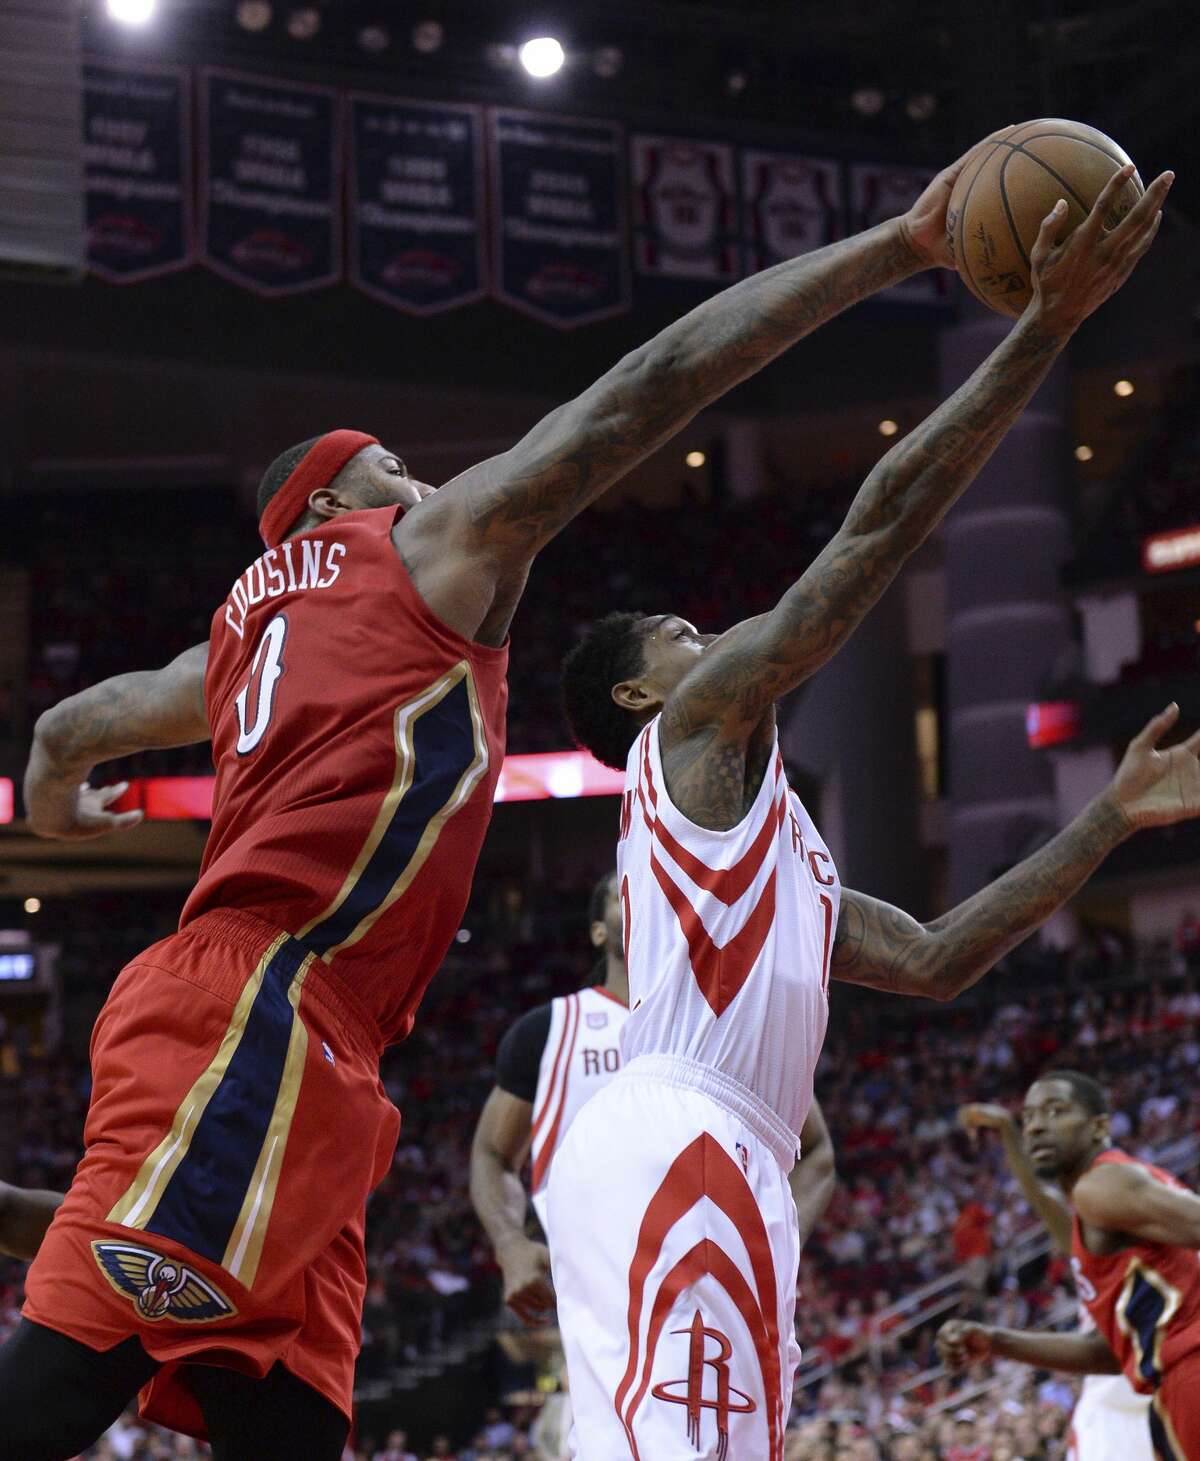 New Orleans Pelicans forward DeMarcus Cousins (0) blocks a shot by Houston Rockets guard Lou Williams, right, in the second half of an NBA basketball game Friday, March 24, 2017, in Houston. (AP Photo/George Bridges)